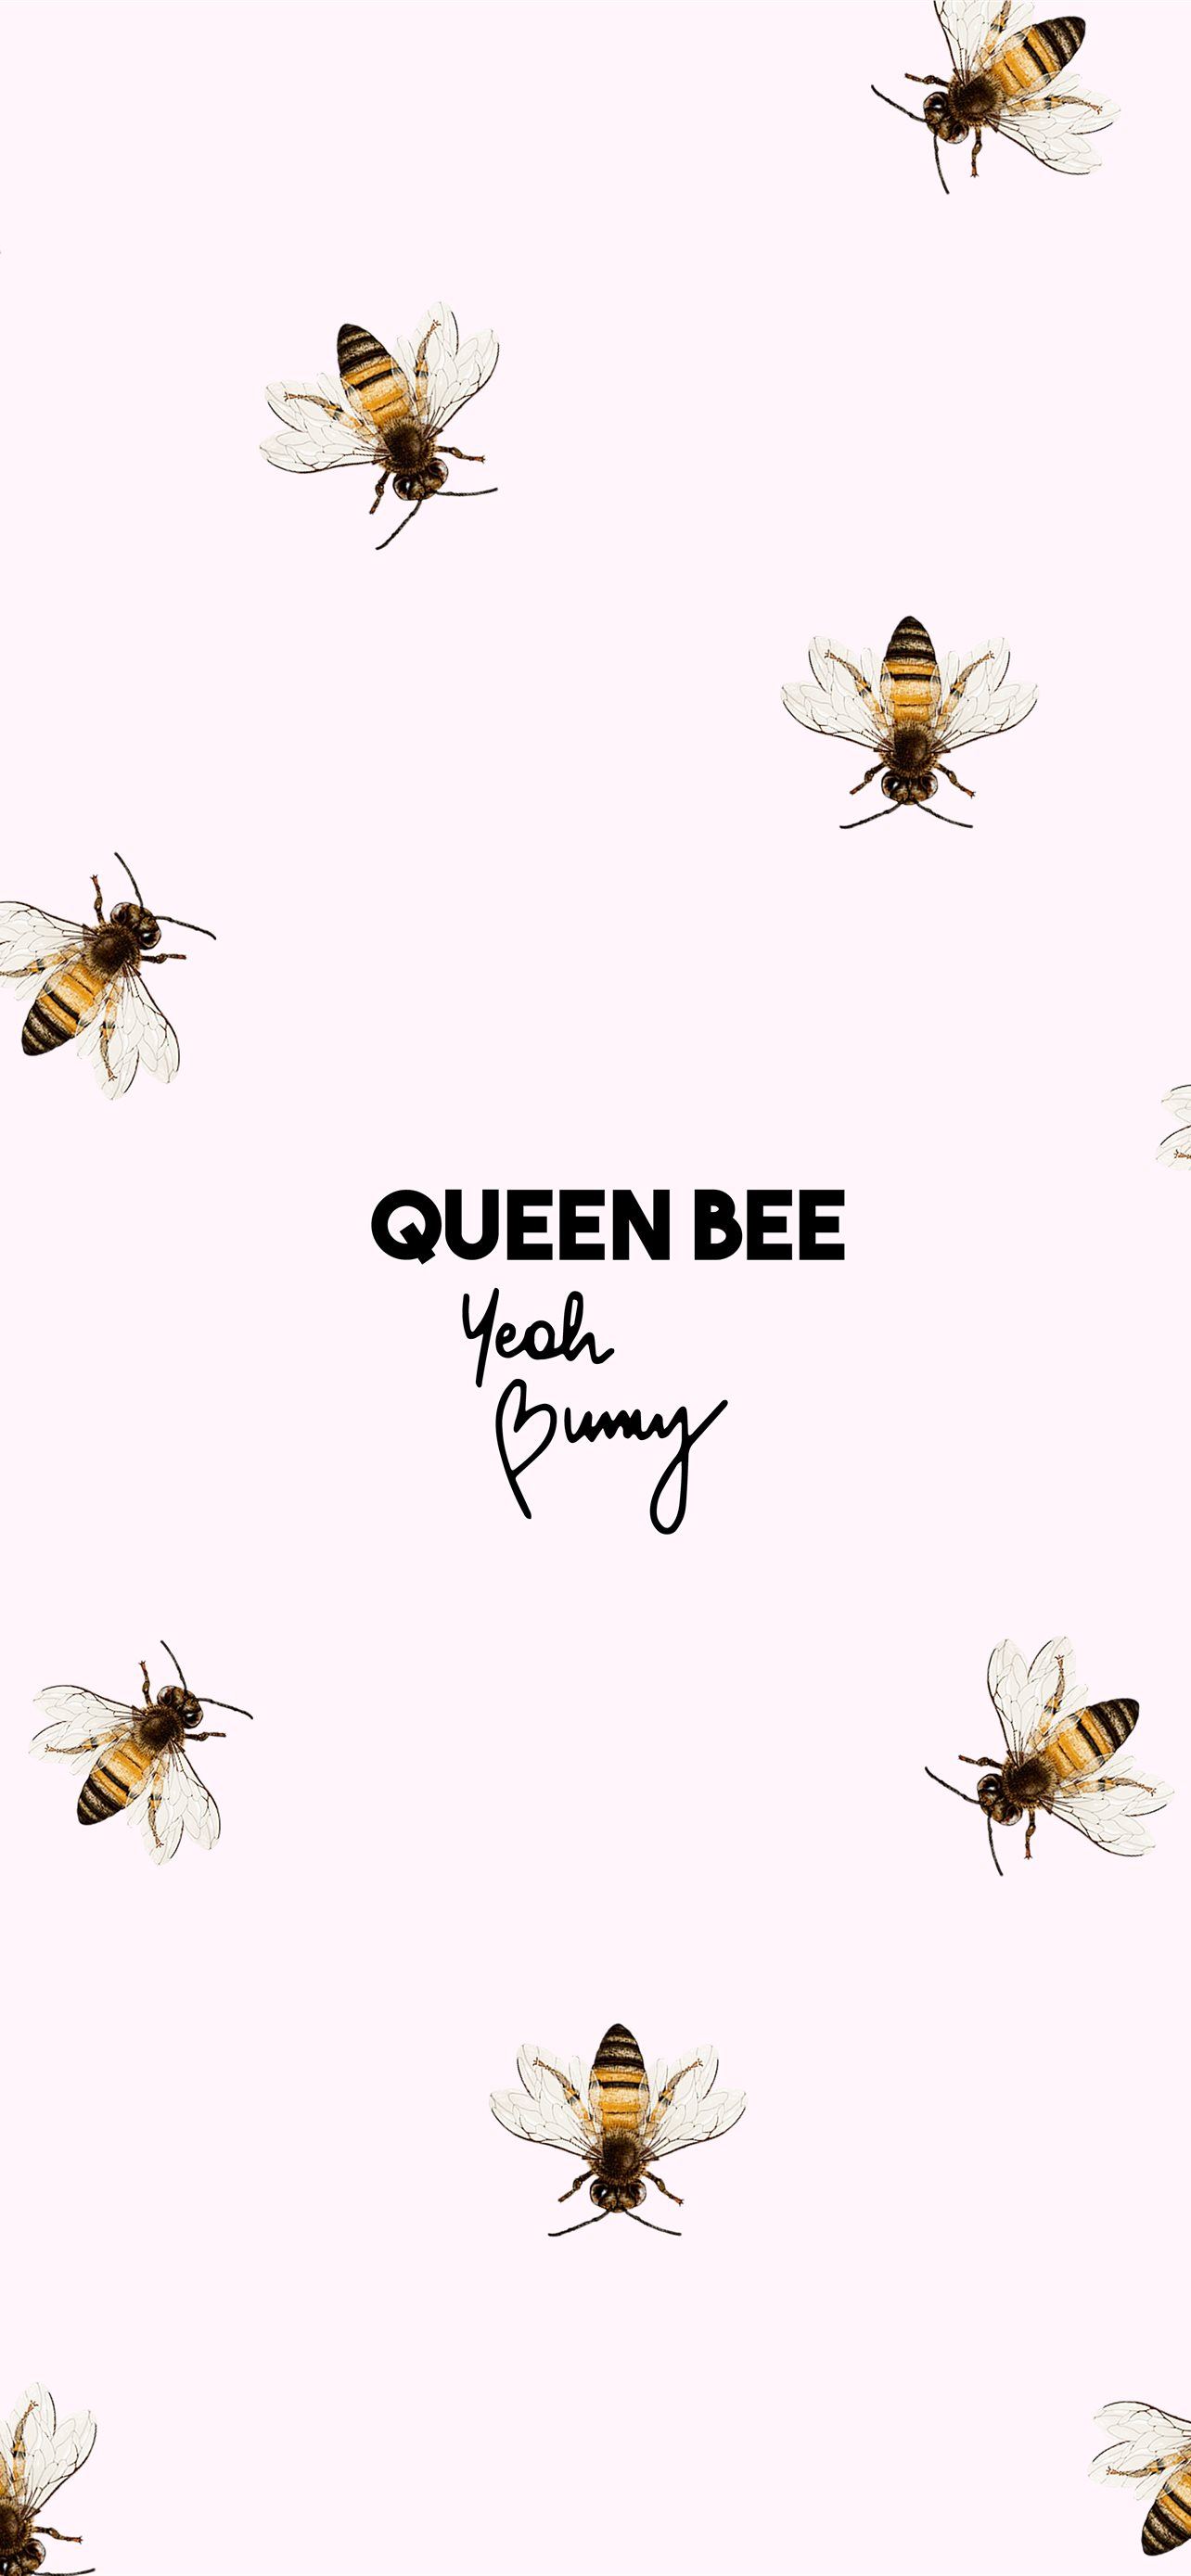 Honey Bee Pictures  Download Free Images on Unsplash